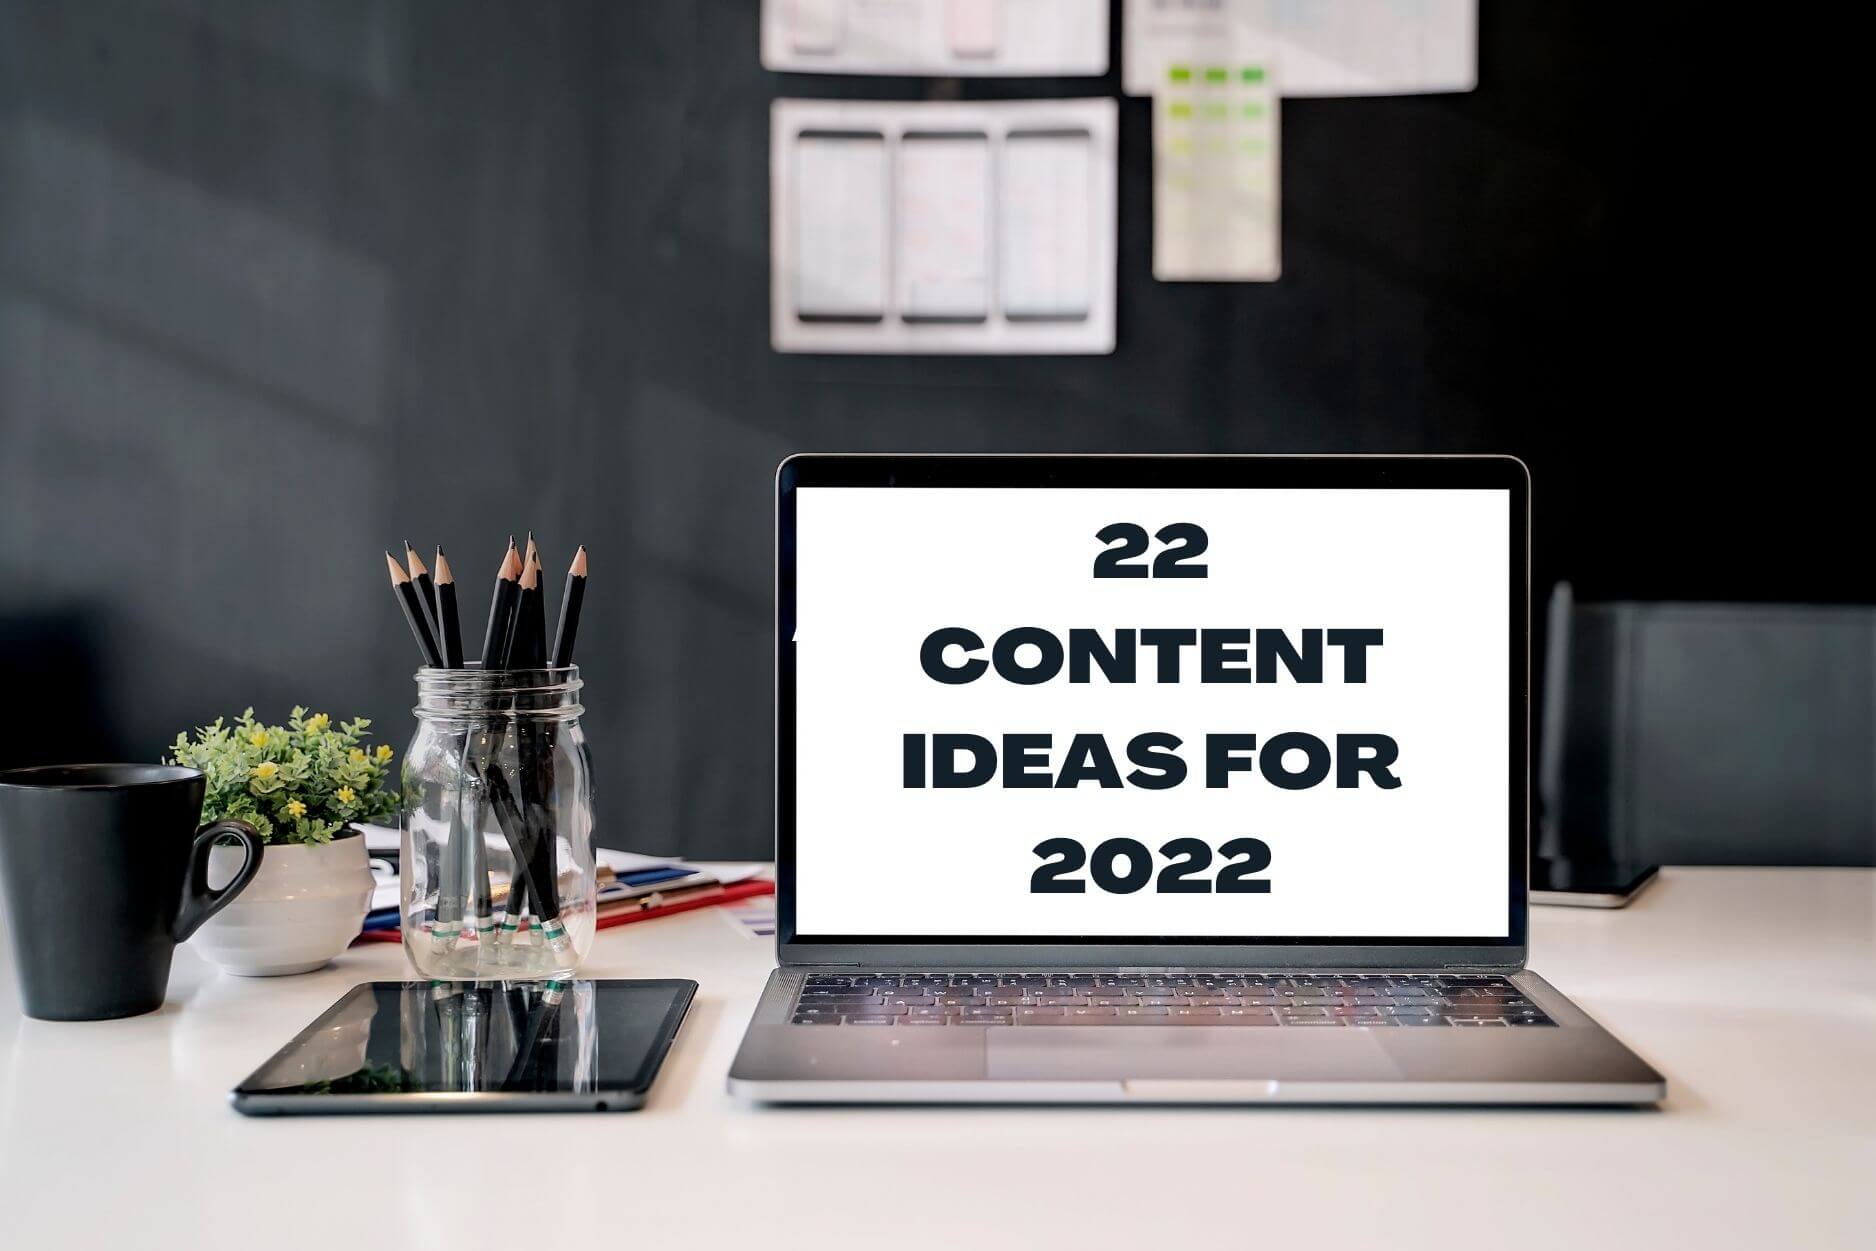 22 content ideas for 2022